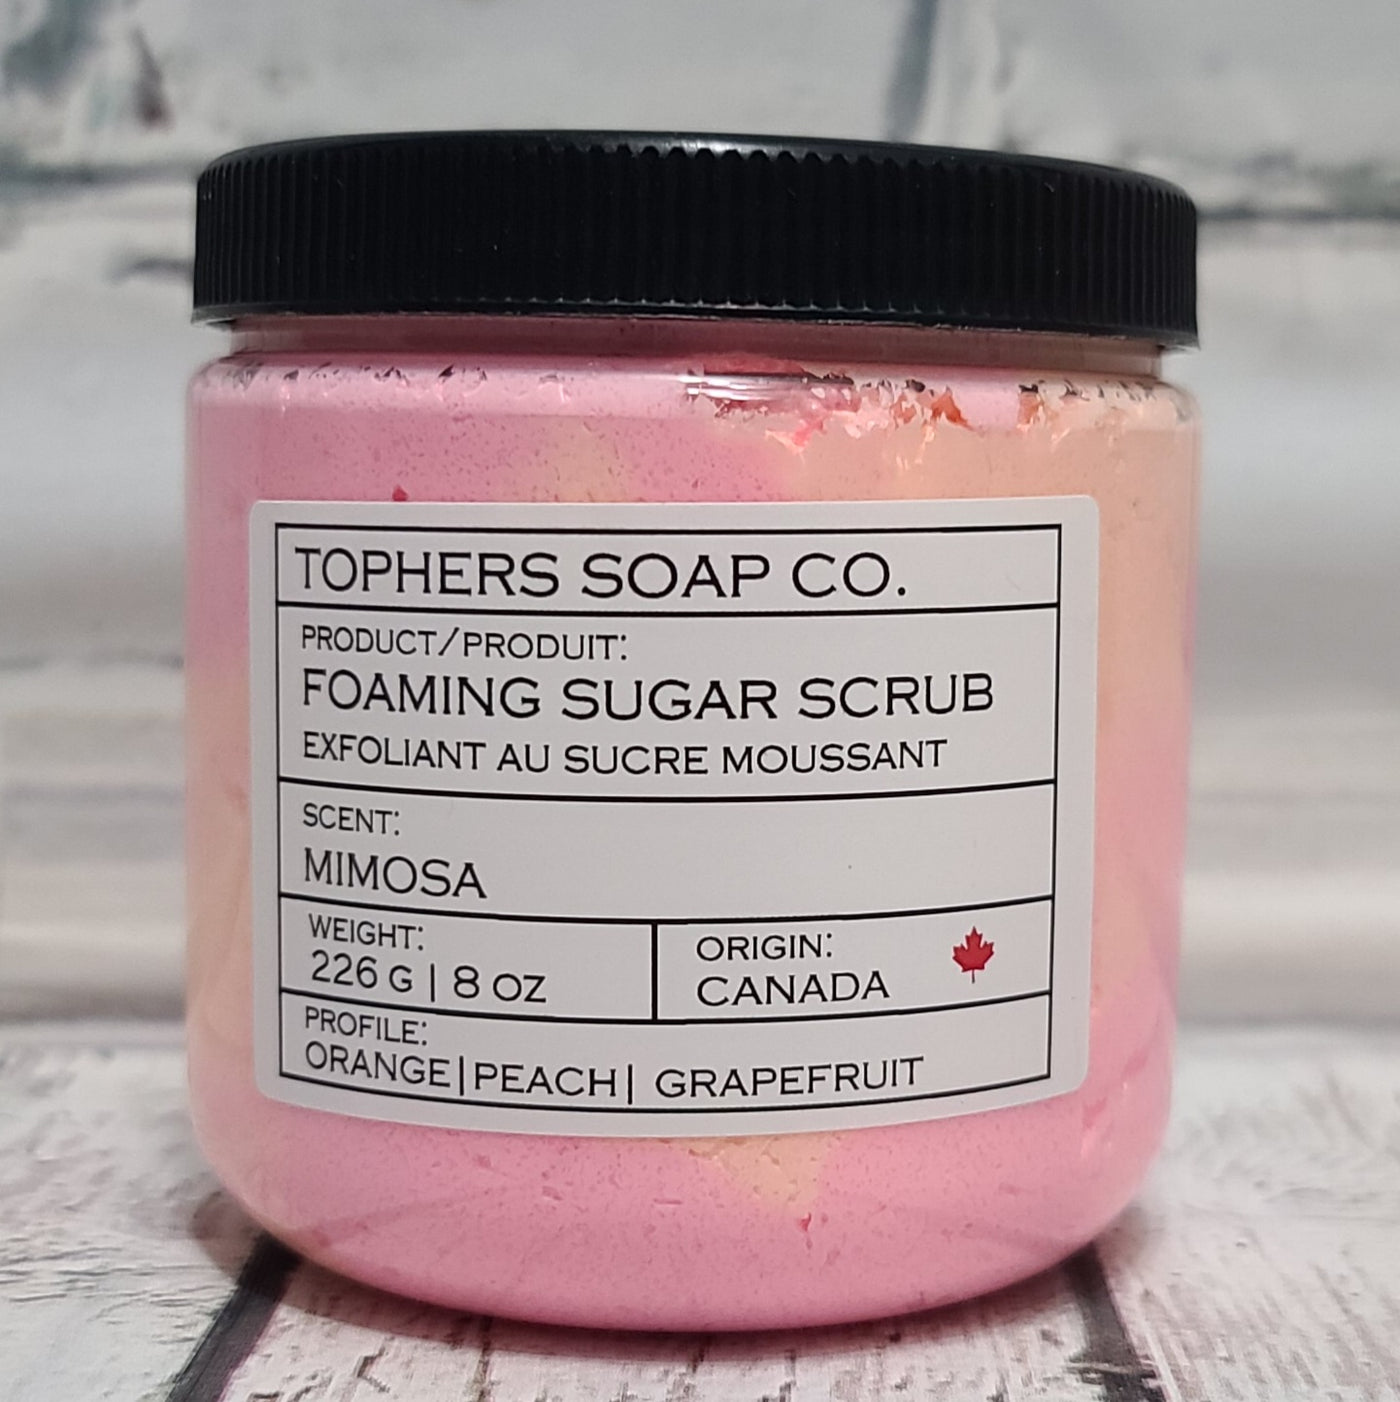 Orange and pink sugar scrub in a clear jar with a black lid against a white brick background